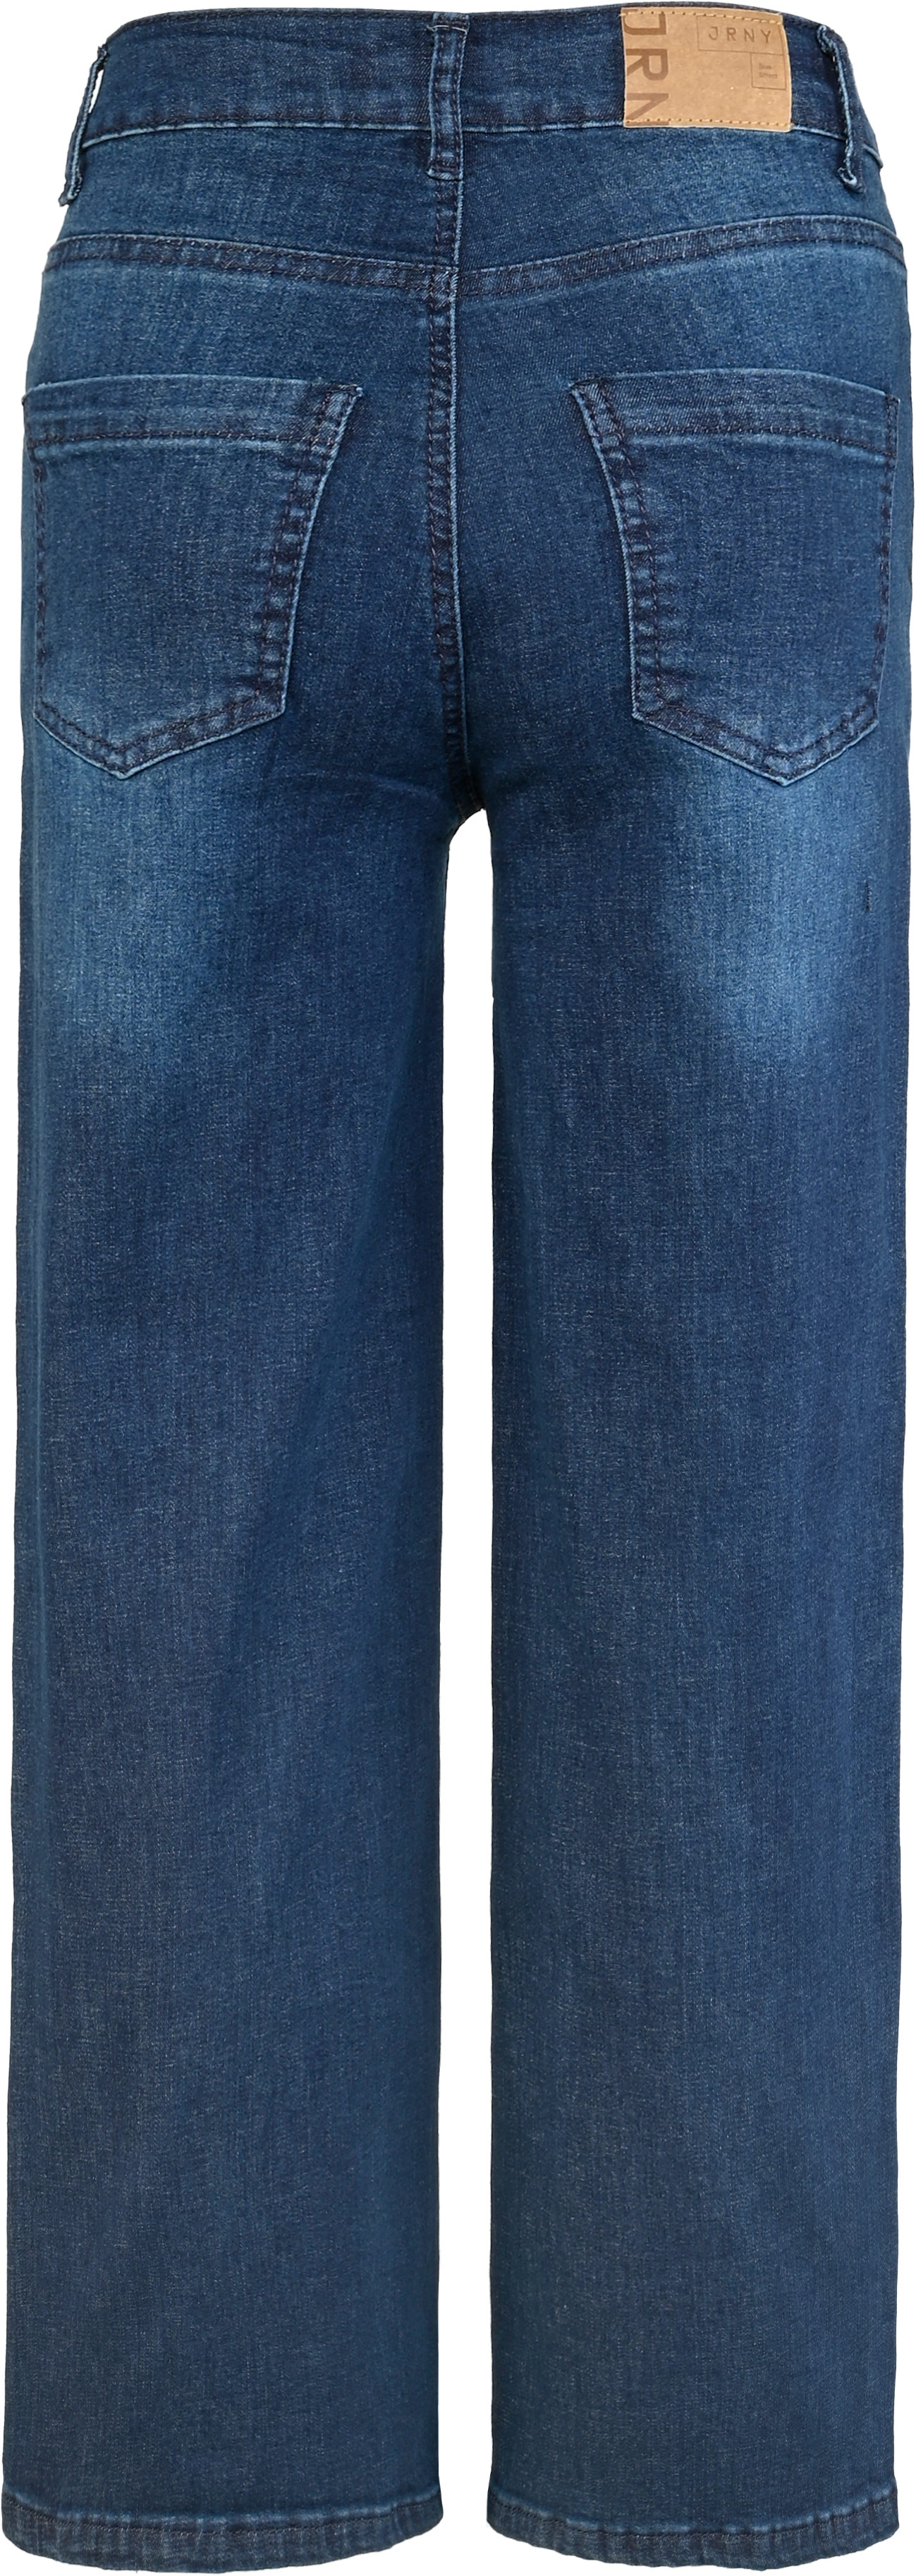 1359-Girls Super Wide Leg Jean straight, available in normal